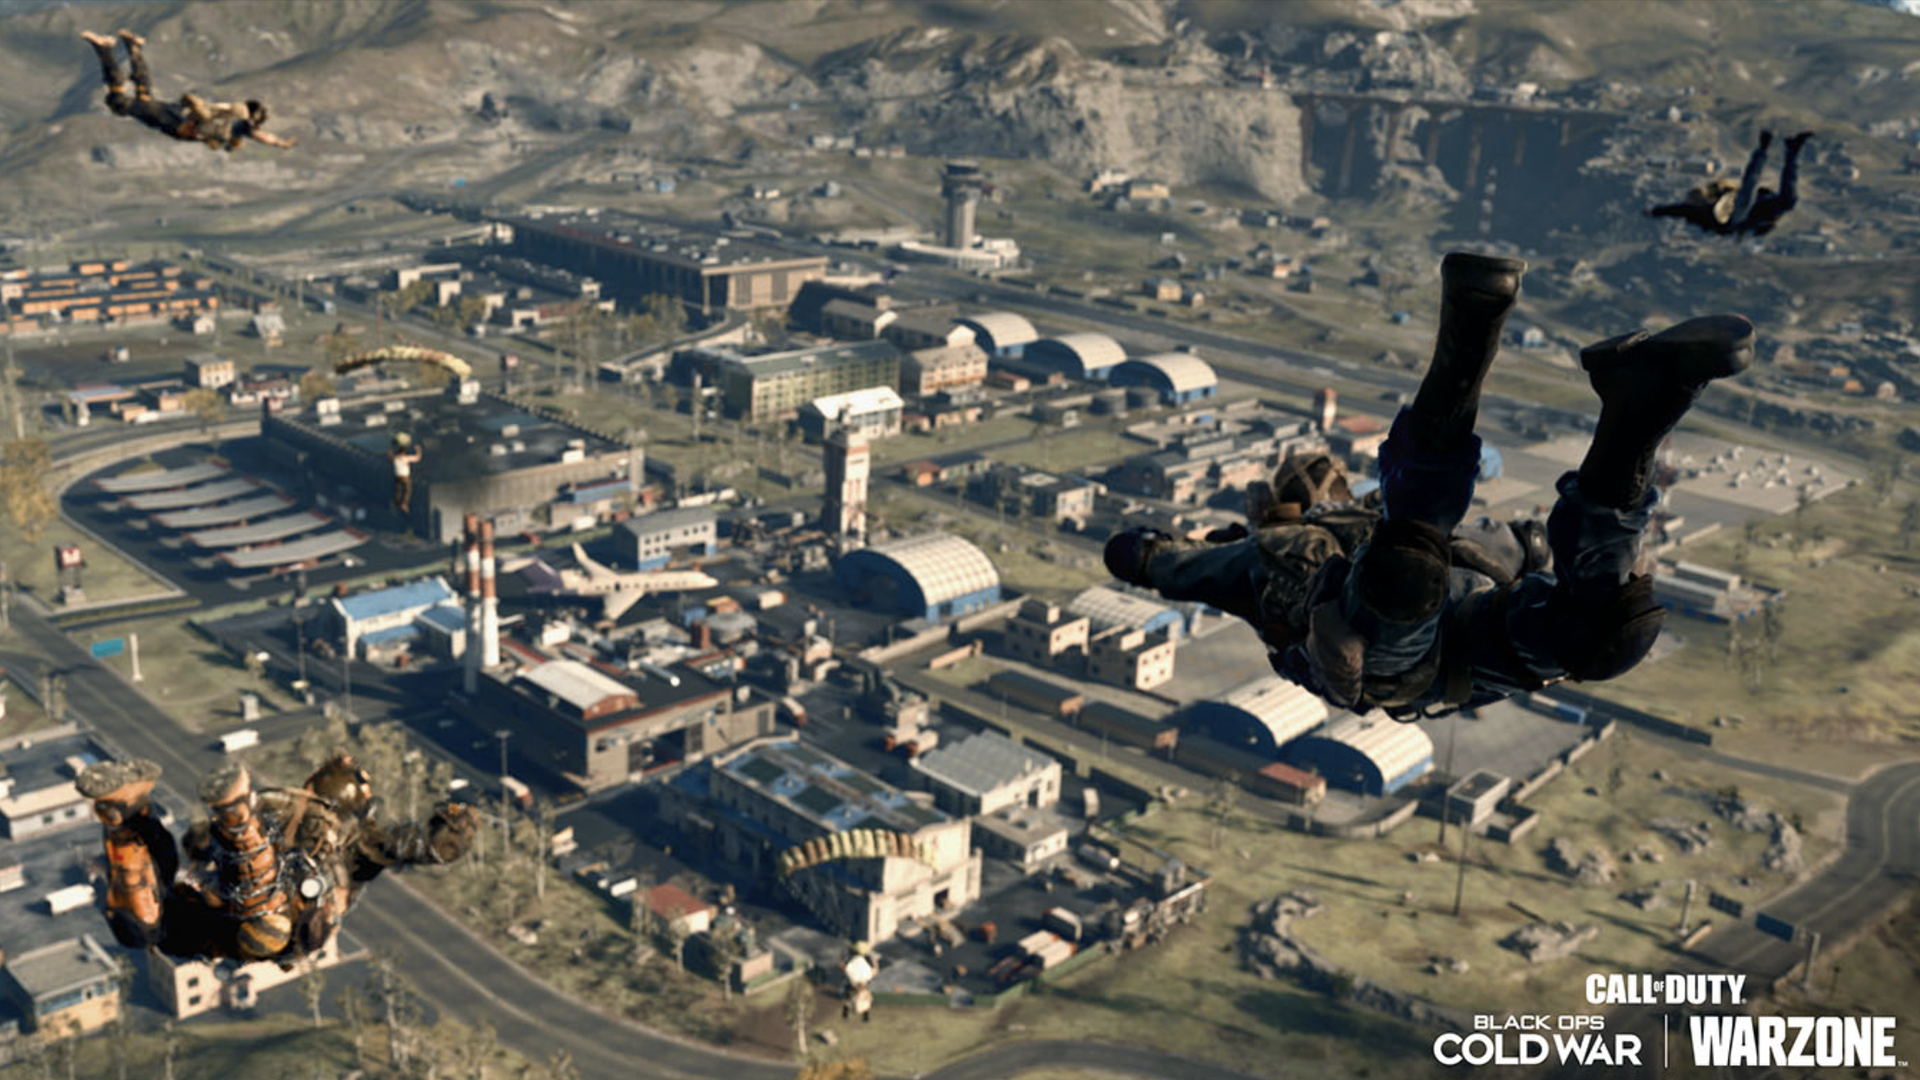 Video game screenshot of soldiers parachuting down to a city